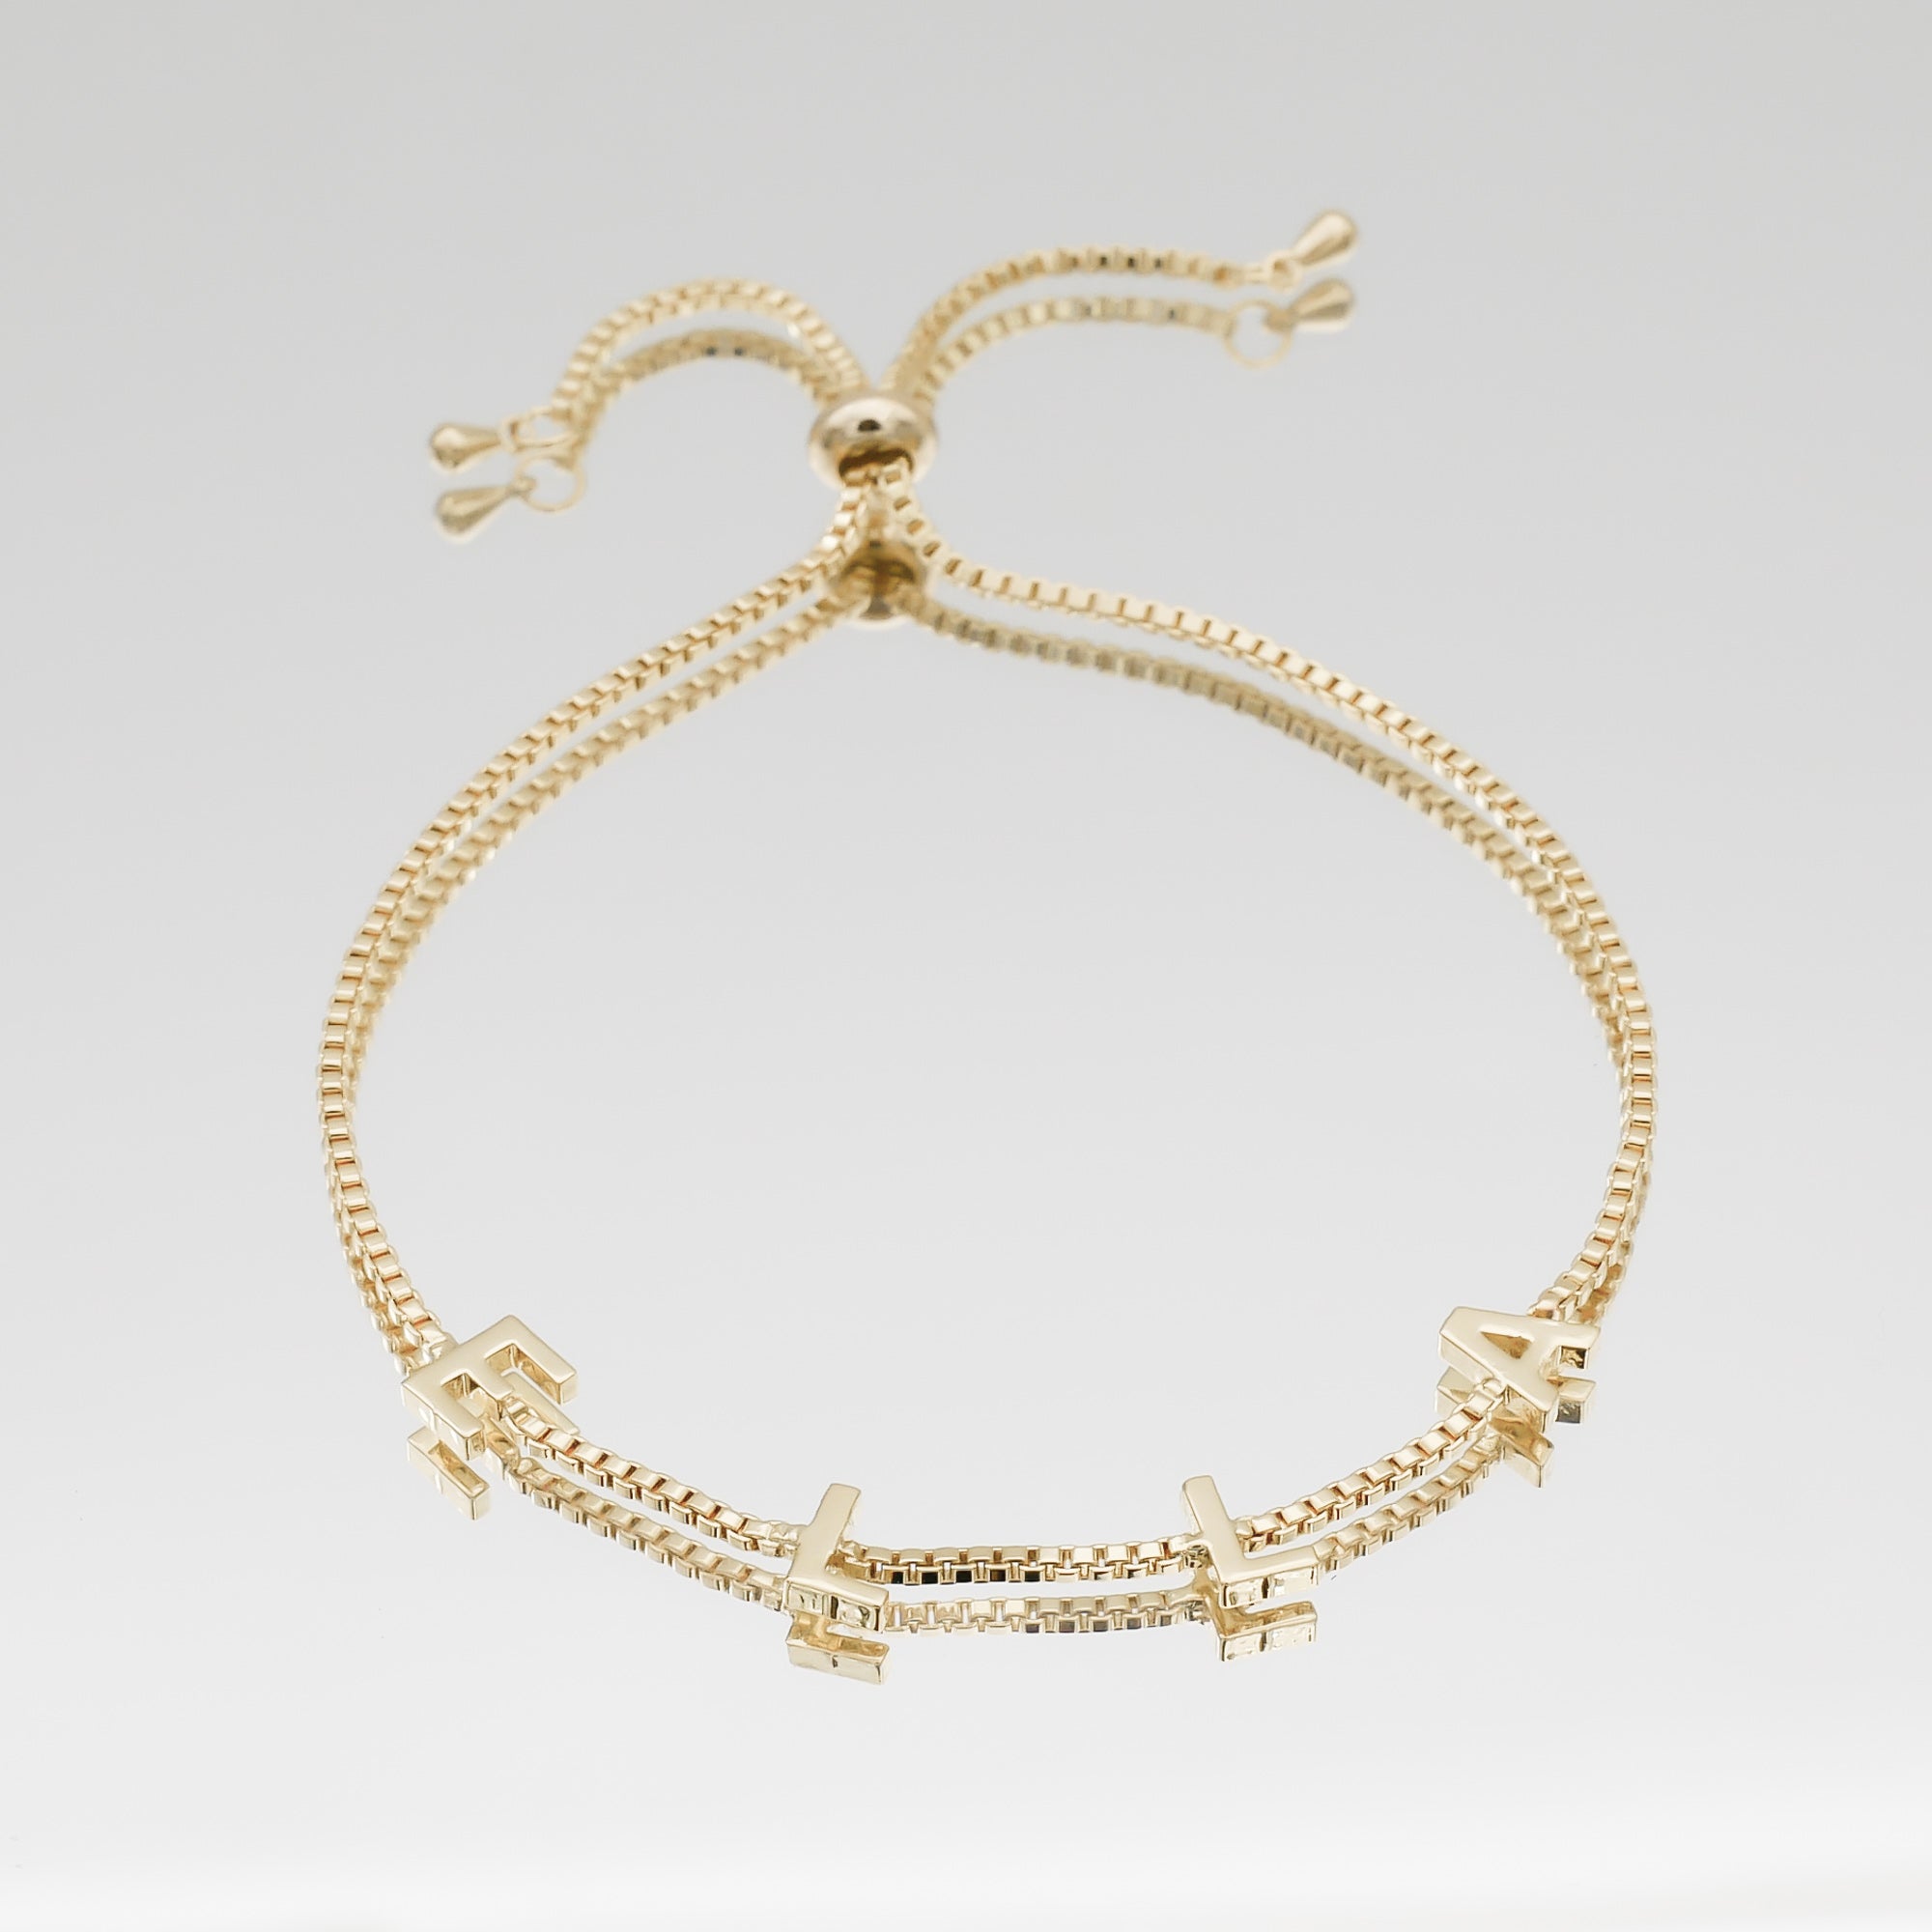 Classic personalised name bracelet in 18K gold with charm